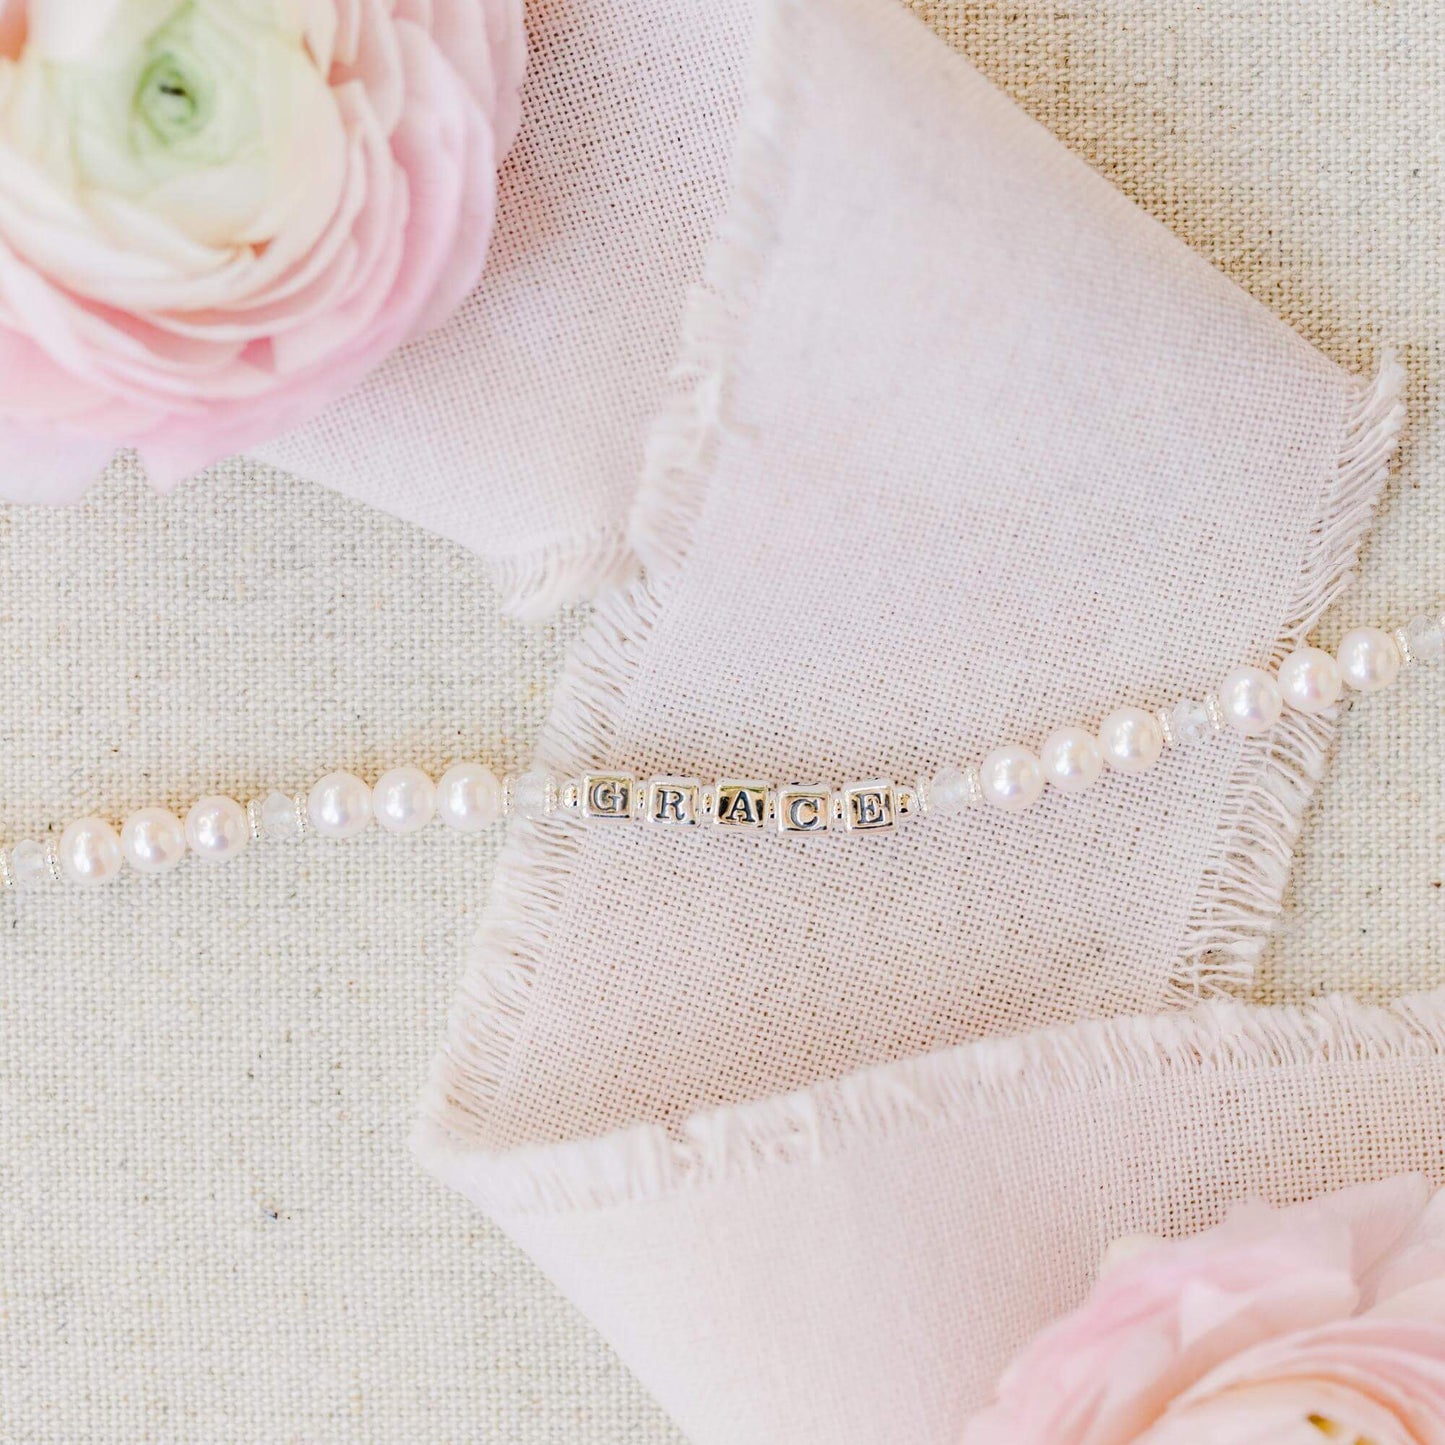 Adorable Pearl and Birthstone Name Bracelet